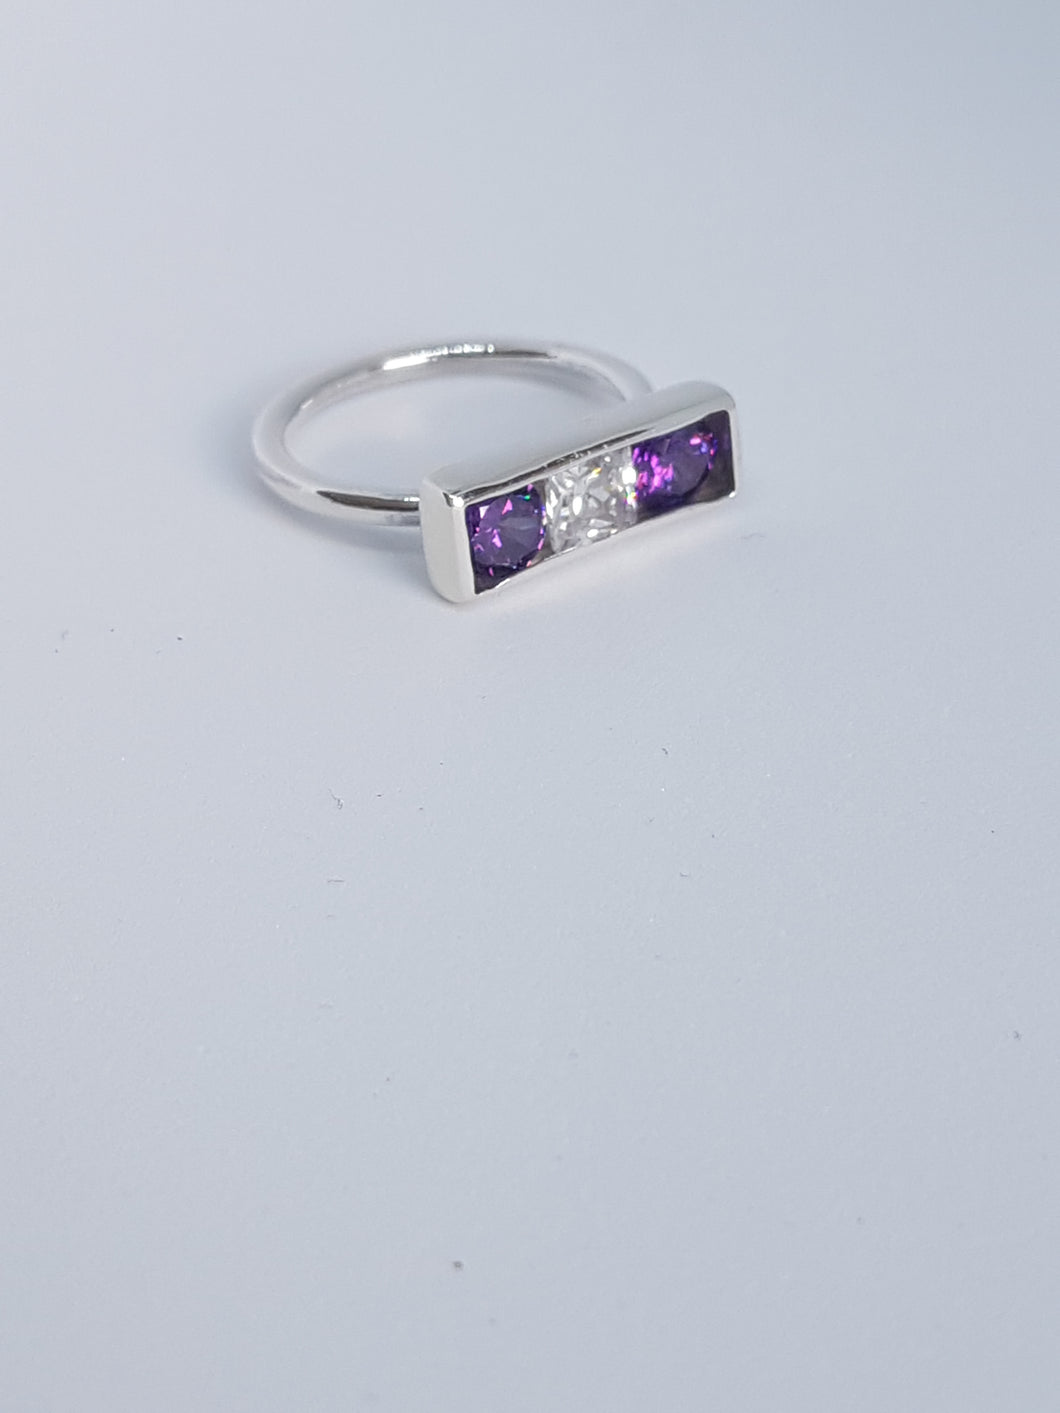 Sterling silver ring with purple& clear cubic zirconia